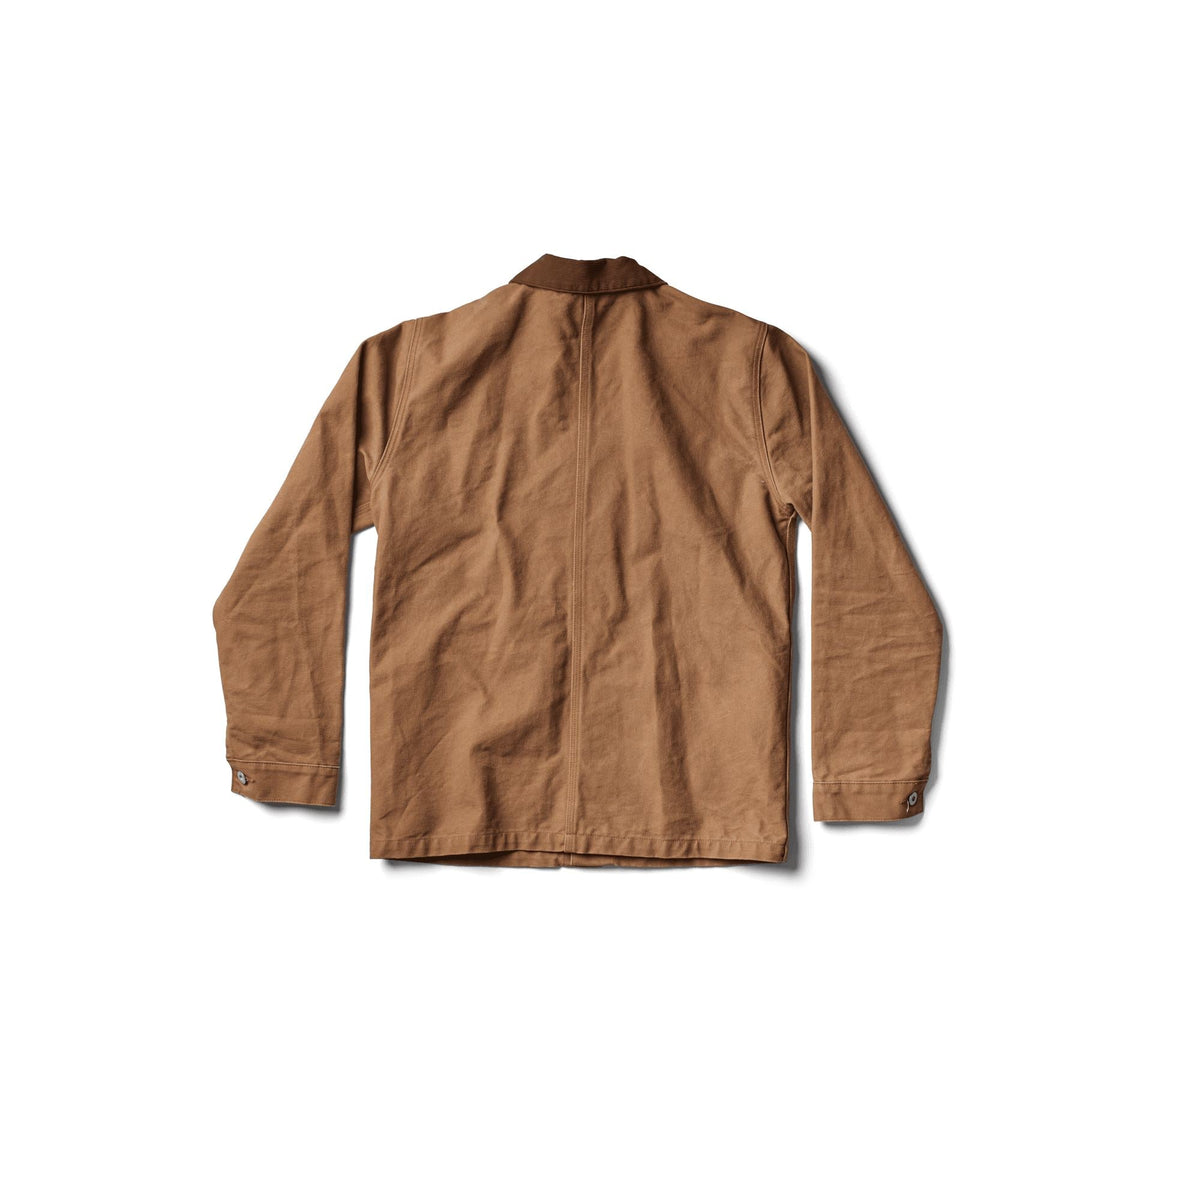 Heartland Jacket - State-side Canvas - grown&amp;sewn